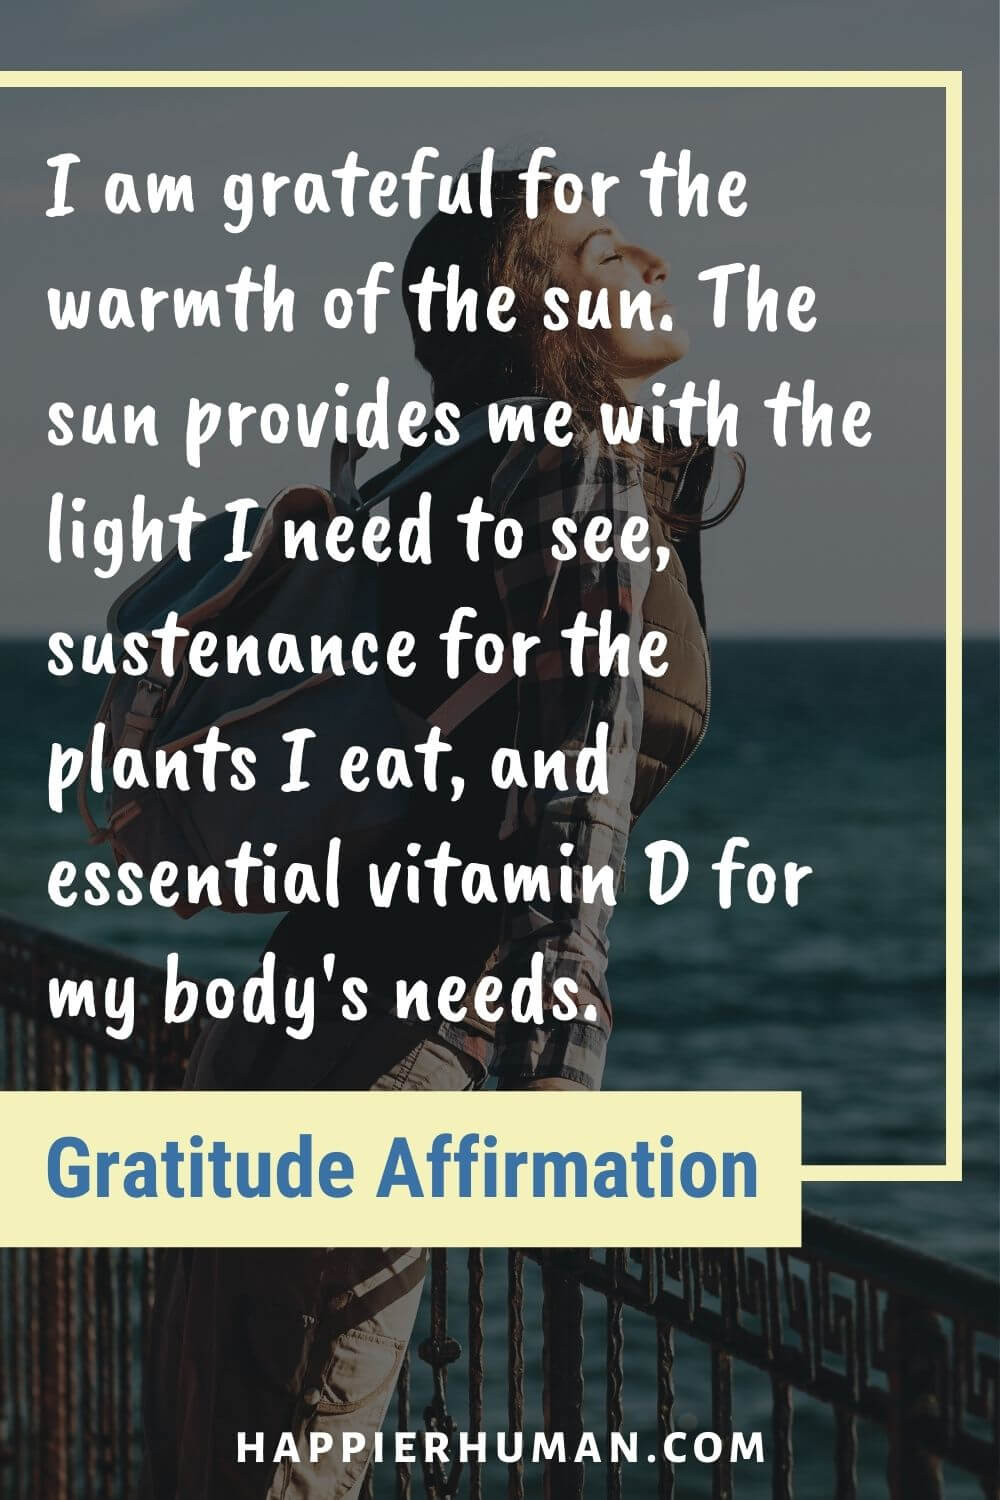 Gratitude Affirmations - I am grateful for the warmth of the sun. The sun provides me with the light I need to see, sustenance for the plants I eat, and essential vitamin D for my body's needs. | morning gratitude affirmations law of attraction | 10 morning gratitude affirmations | louise hay gratitude affirmations